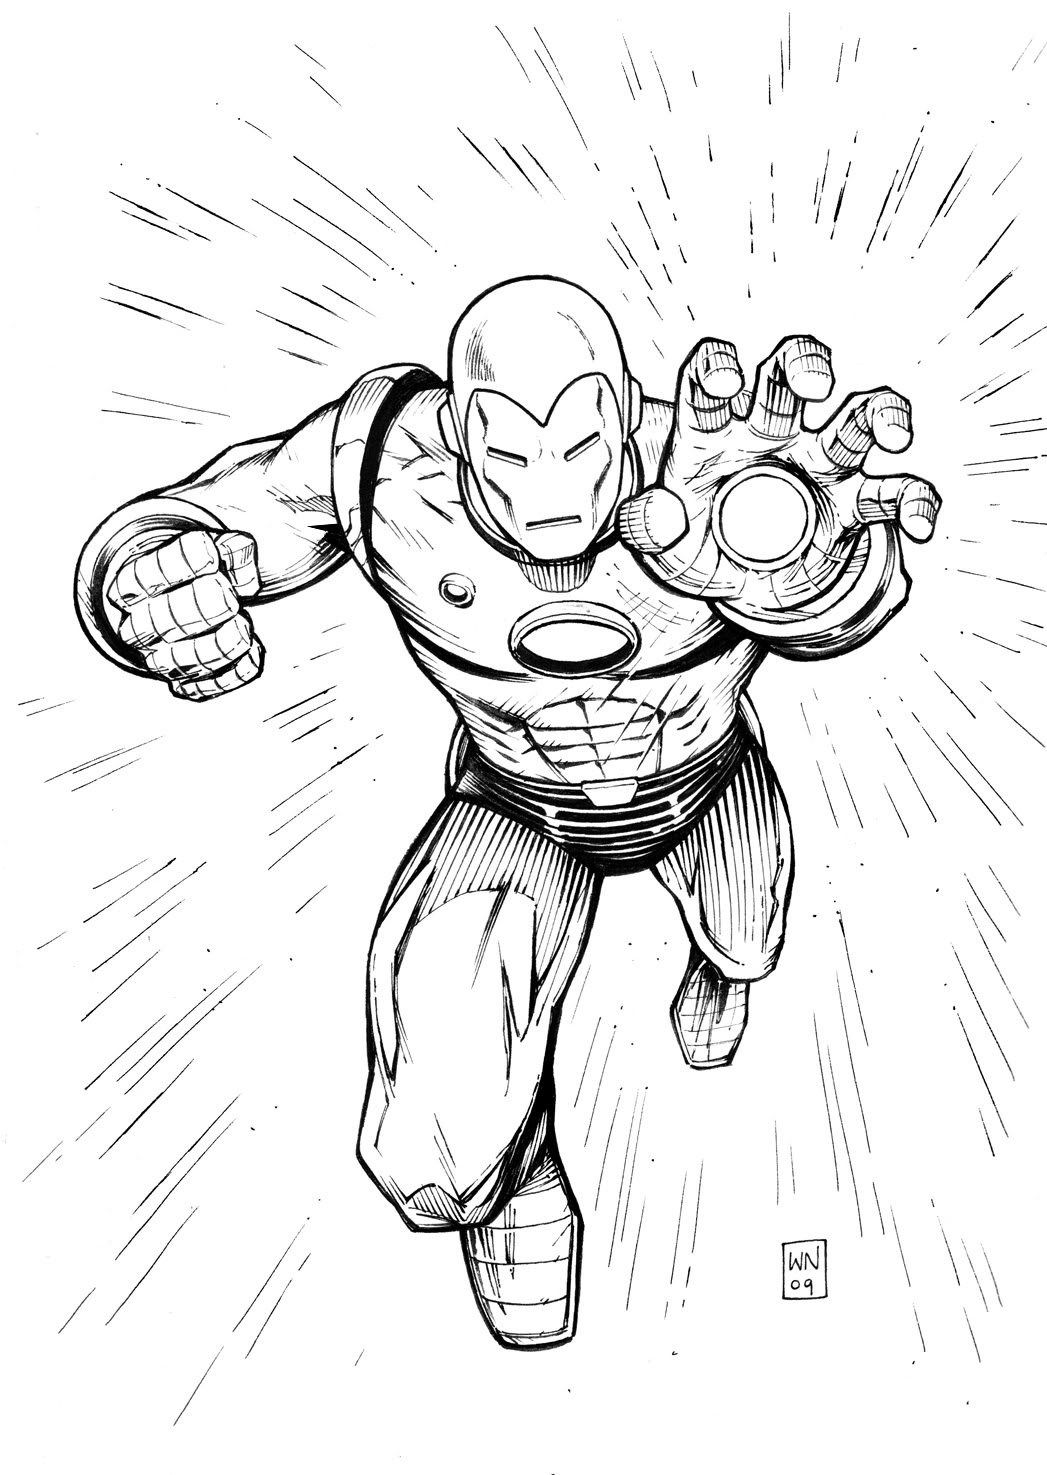  Iron Man Coloring pages | Coloring page for kids | #25